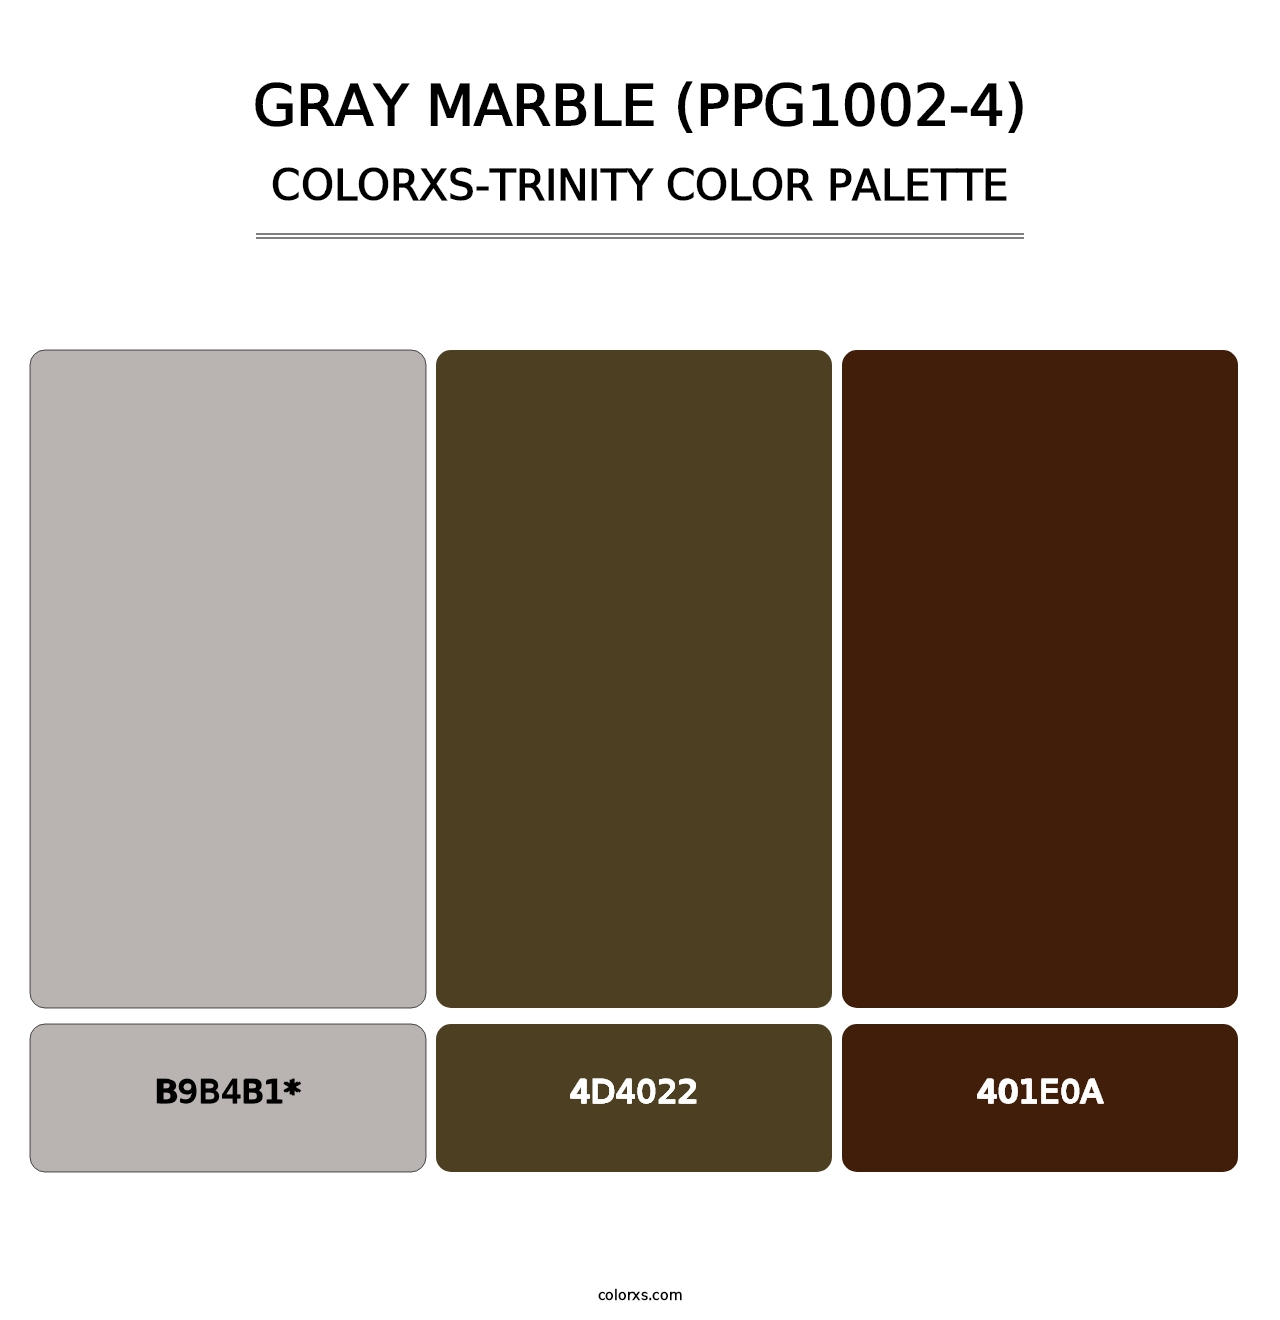 Gray Marble (PPG1002-4) - Colorxs Trinity Palette